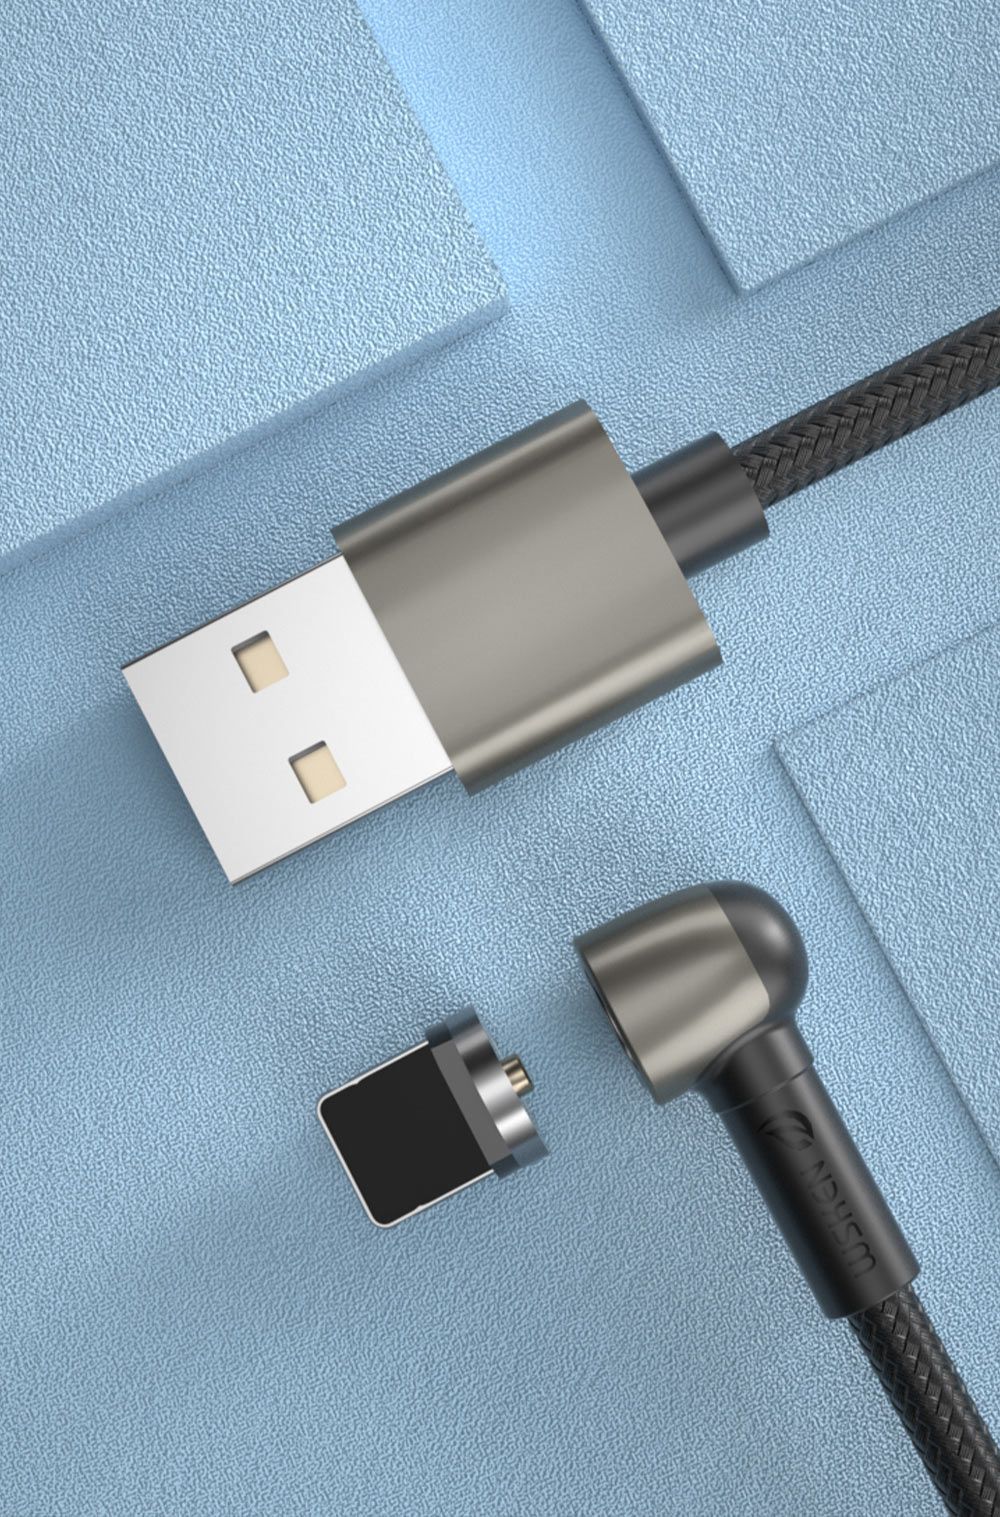 WSKEN-Magnetic-Data-Cable-USB-Type-C-Micro-USB-Magnet-Charge-Core-For-iPhone-XS-11Pro-Mi10-Note-9S-S-1721644